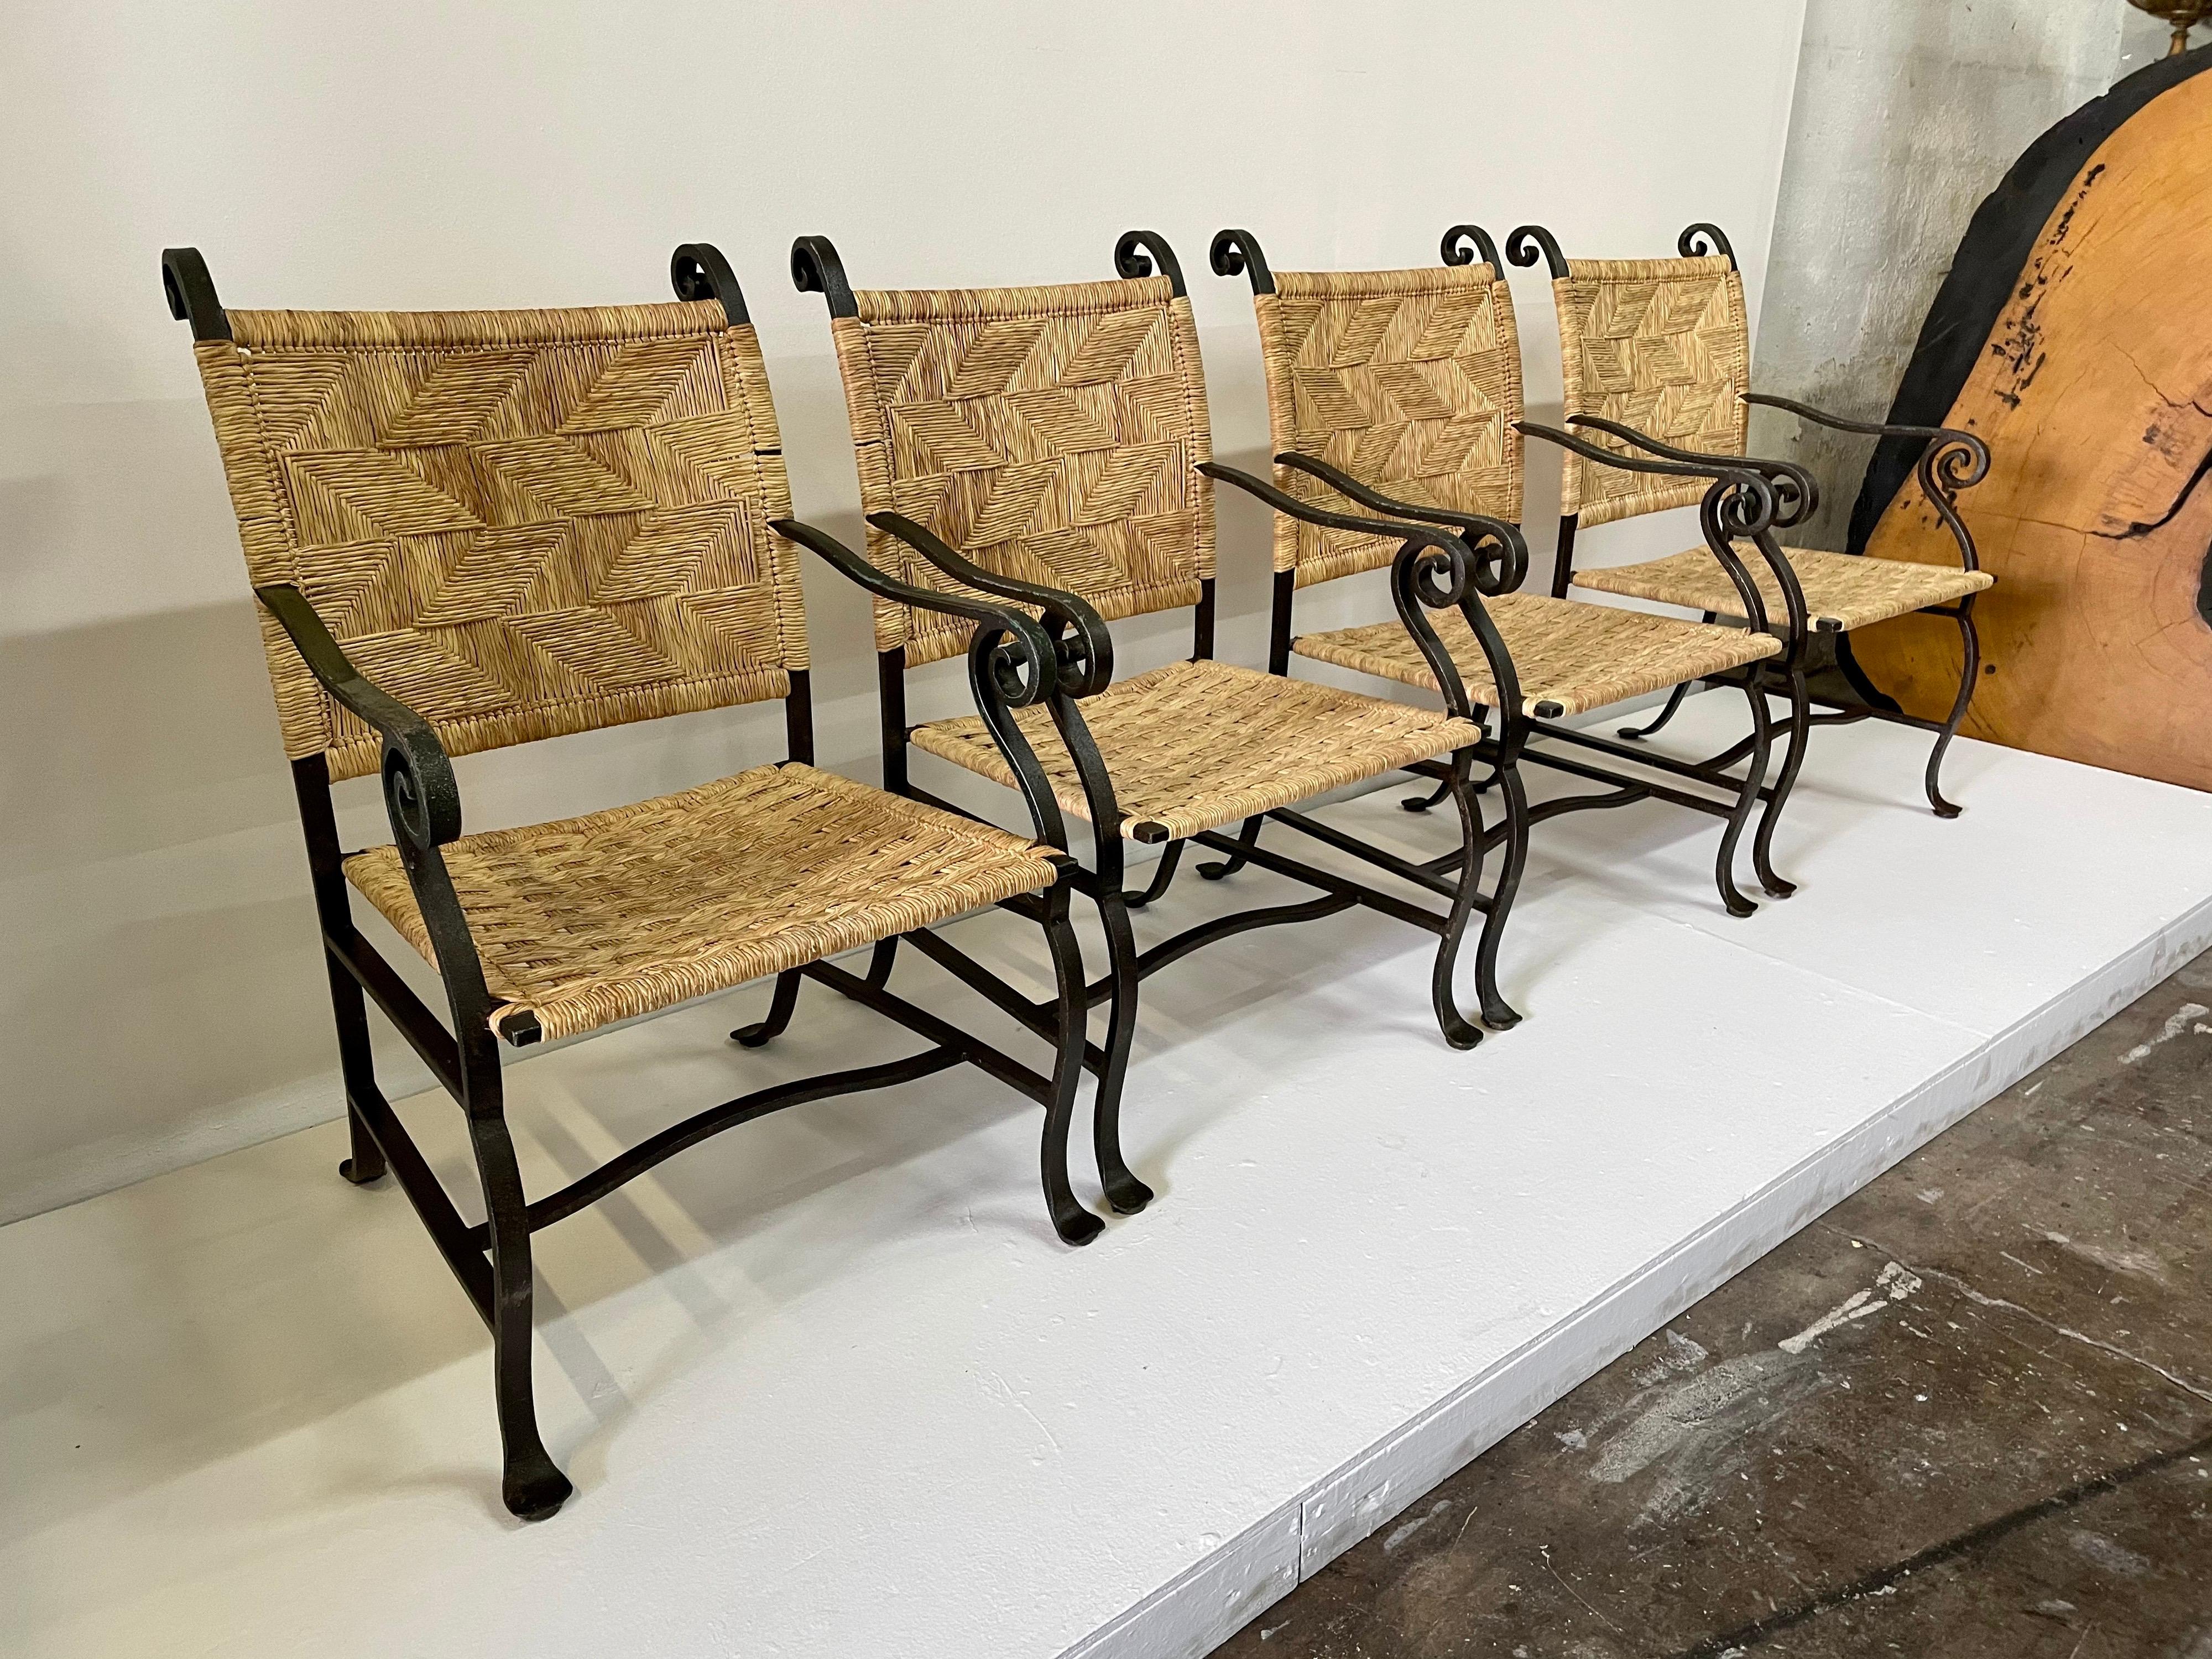 Woven raffia seat and back rests in chevron pattern, these heavy and important hand wrought iron armchairs retain the wonderful original wear and patina from years of use and enjoyment. Made in Mexico, these hand forged iron chairs are heavy and